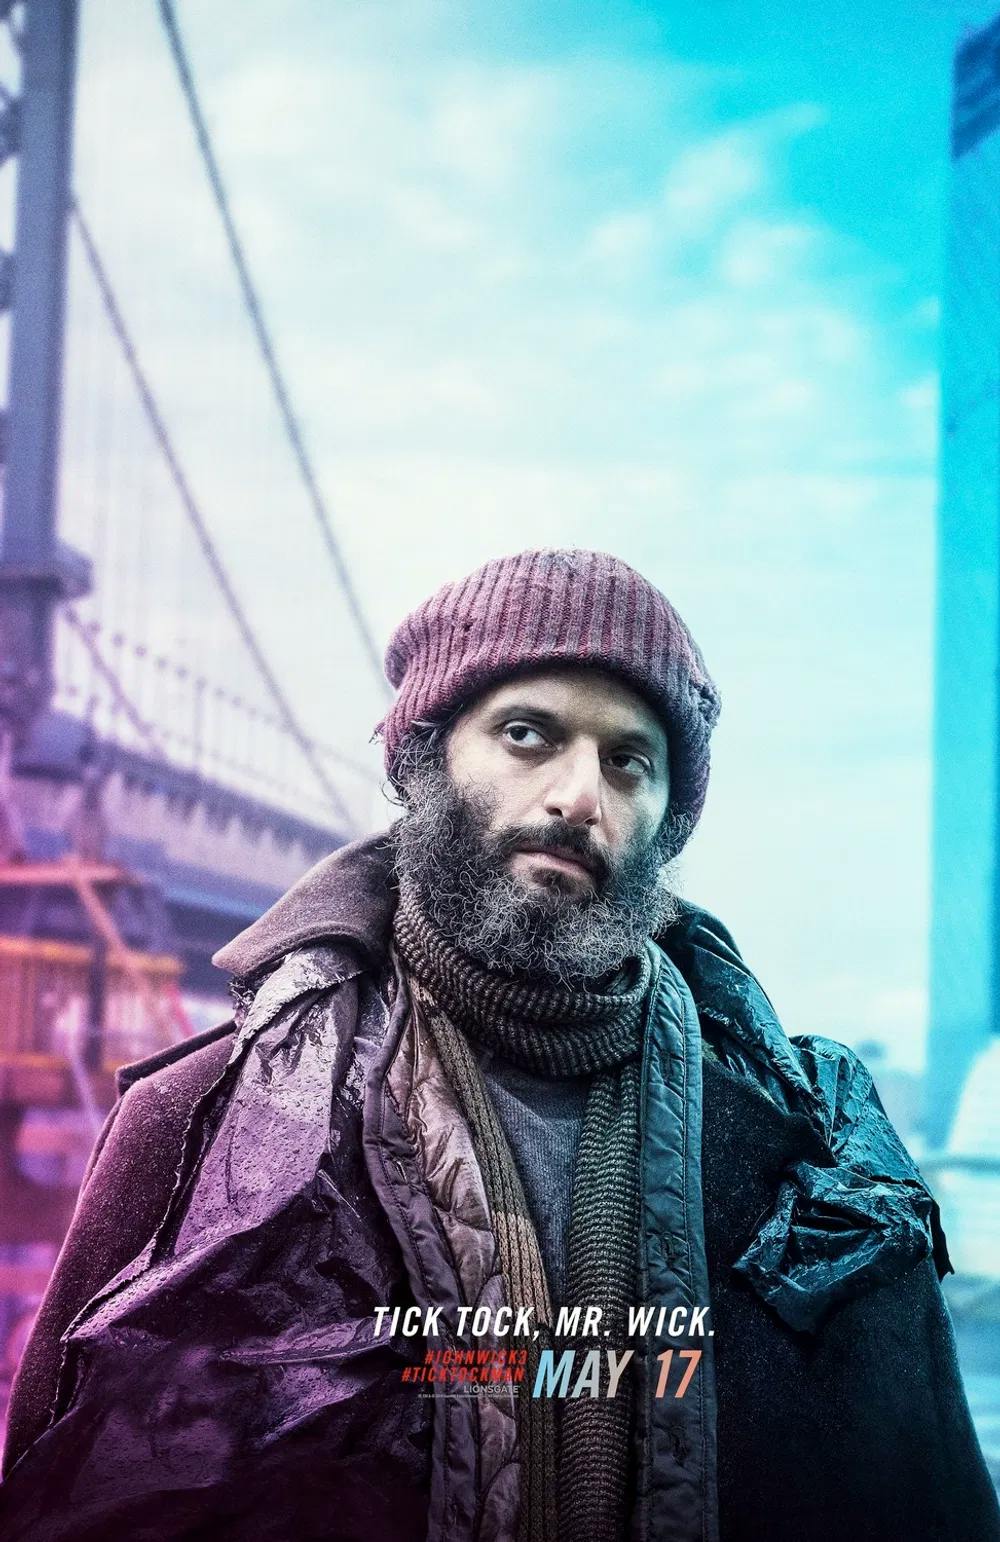 Blink, and you'll miss Jason Mantzoukas in "John Wick Chapter 3: Parabellum," but you can stare at his character poster for as long as you want. / Courtesy of Lionsgate.